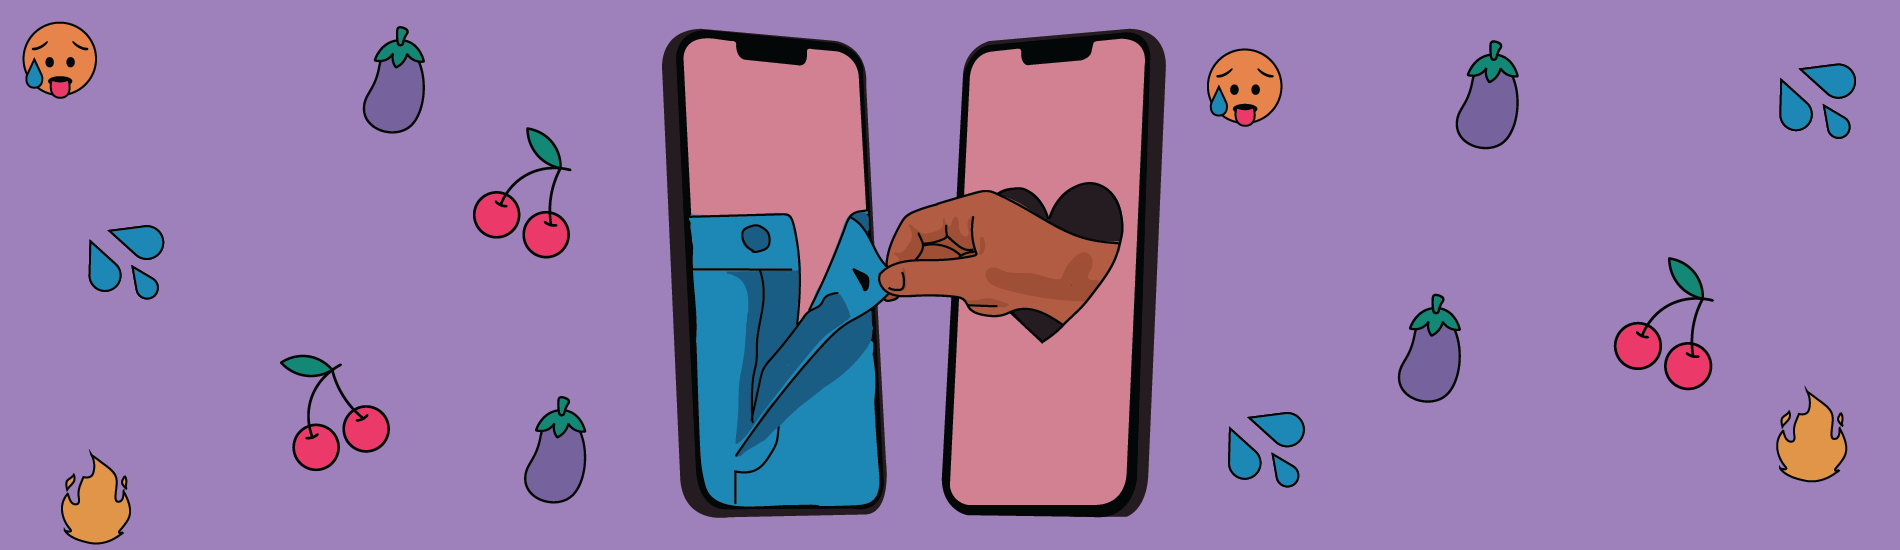 Sexting Illustration of Hand Reaching Through Phone to Unzip Pants 